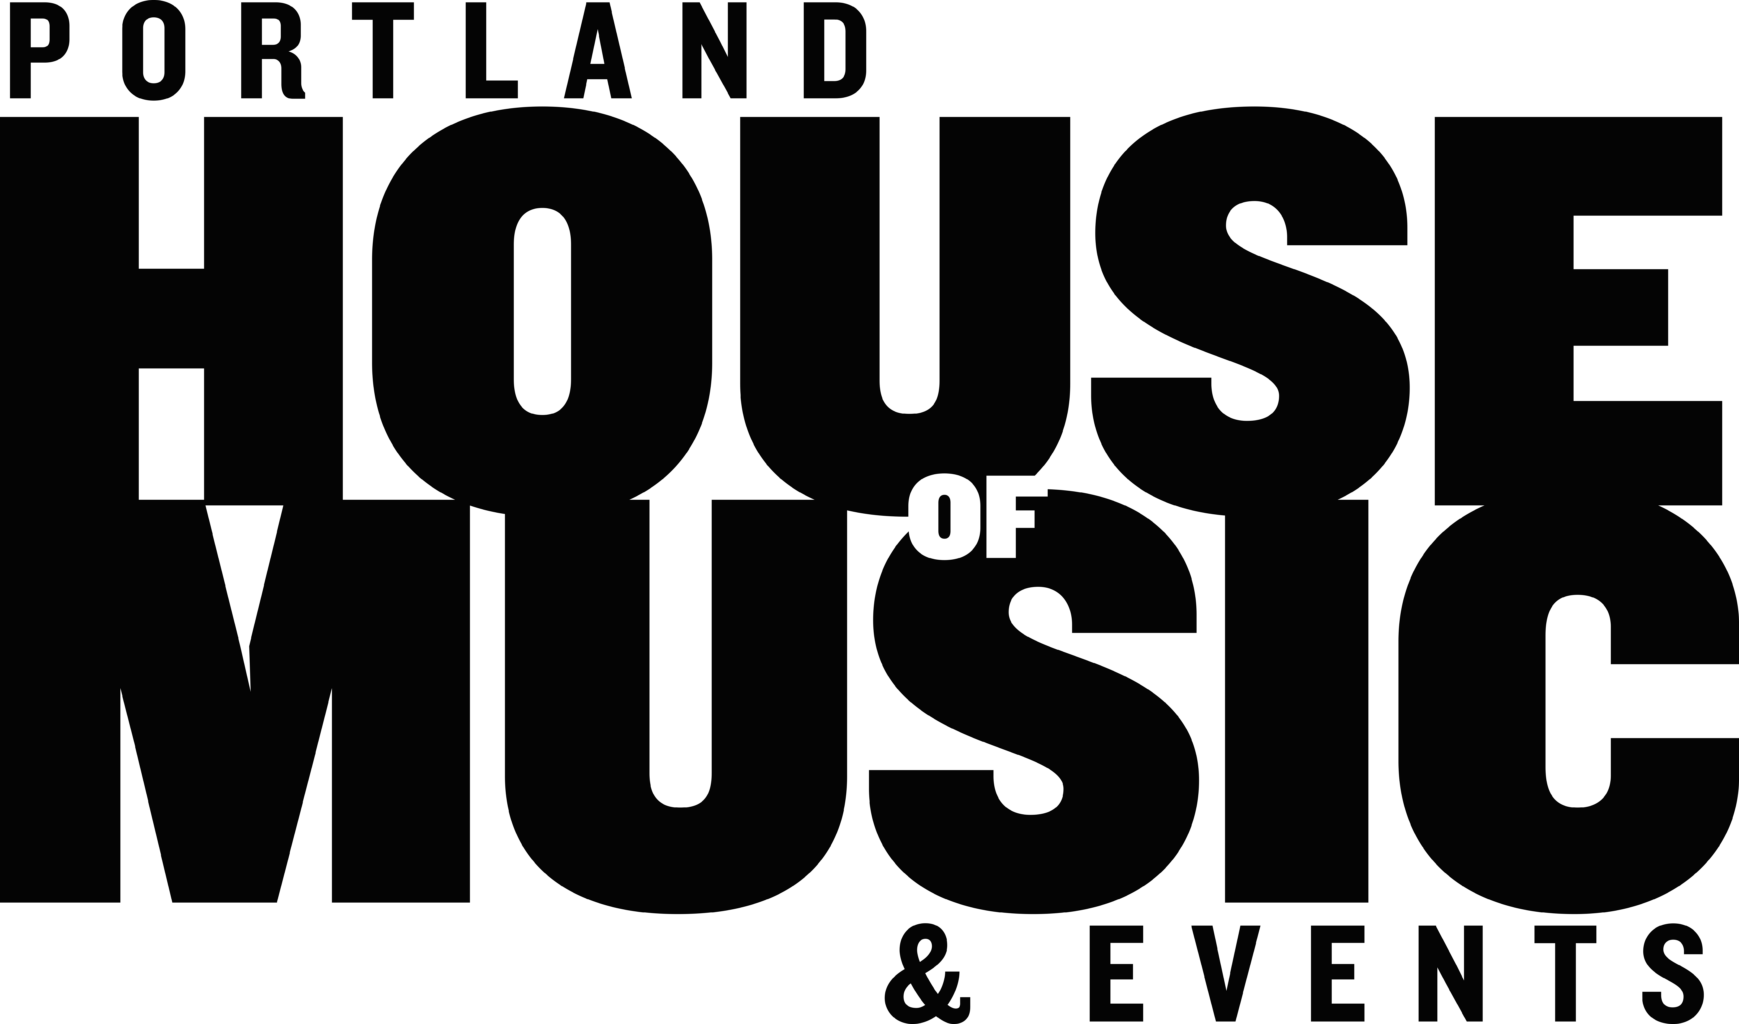 Portland House of Music and Events